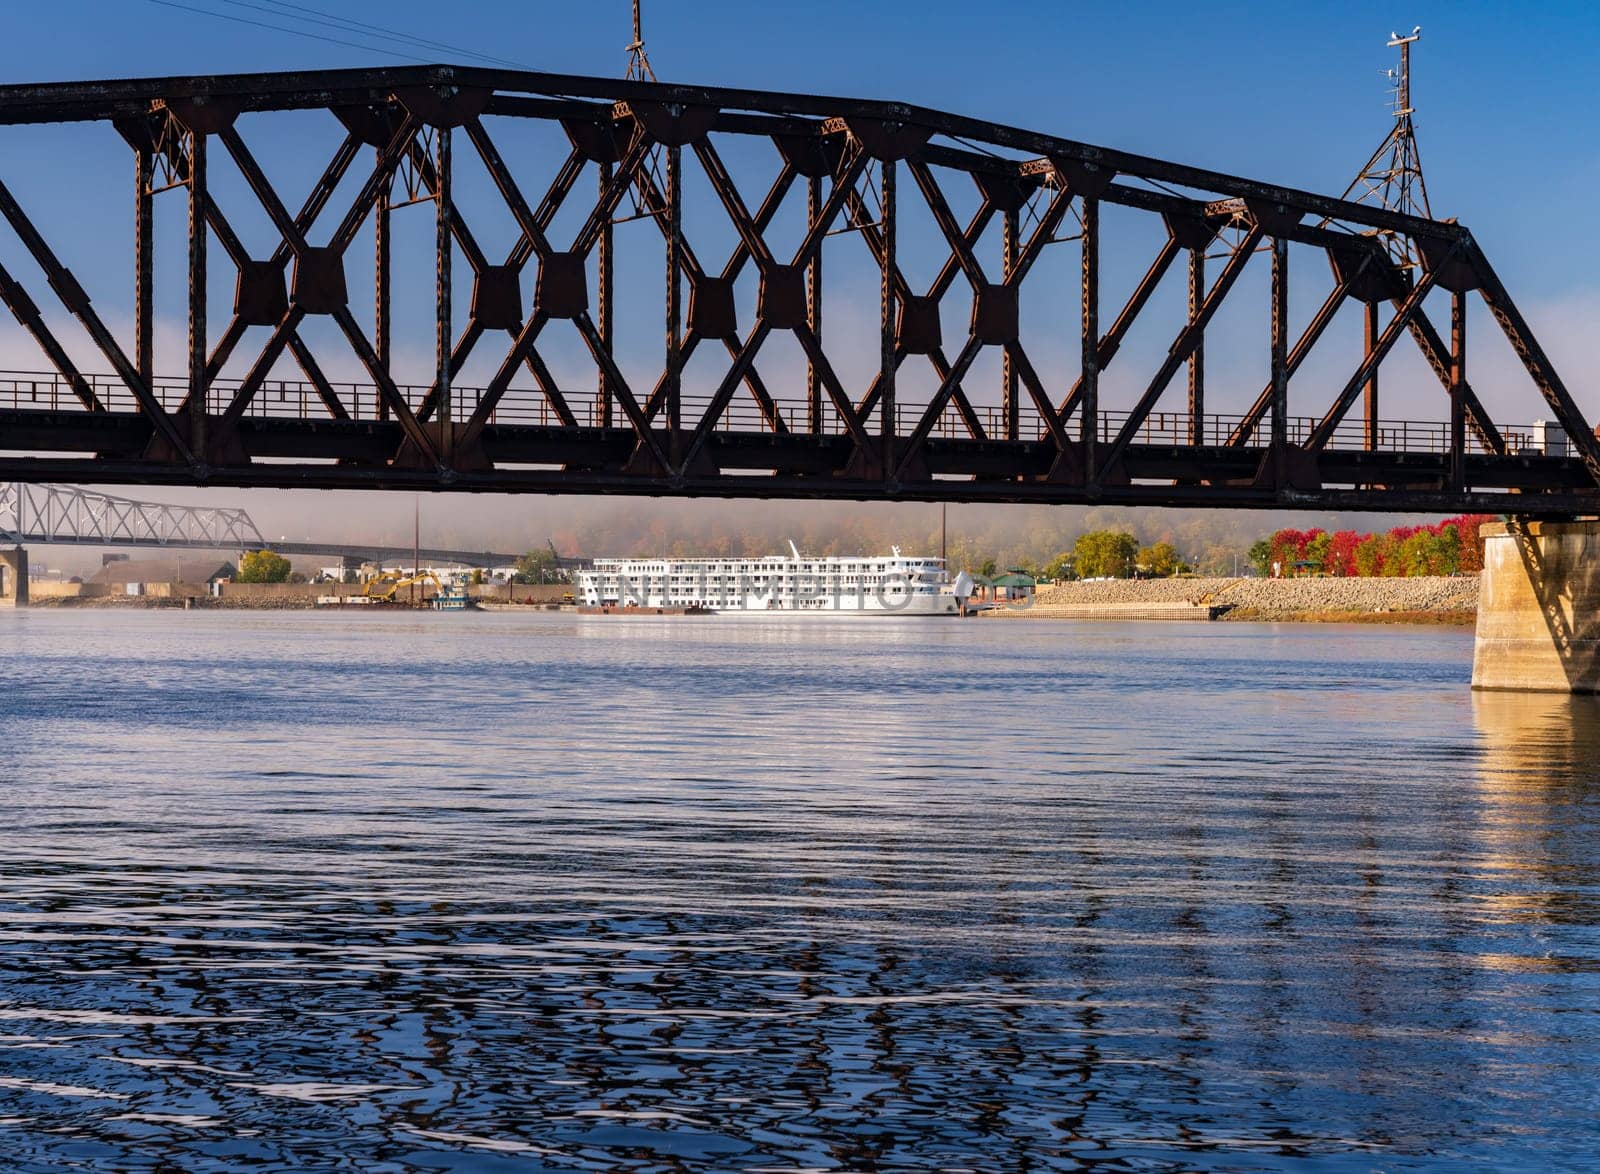 River cruise boat docked in Dubuque IA under Railroad bridge by steheap